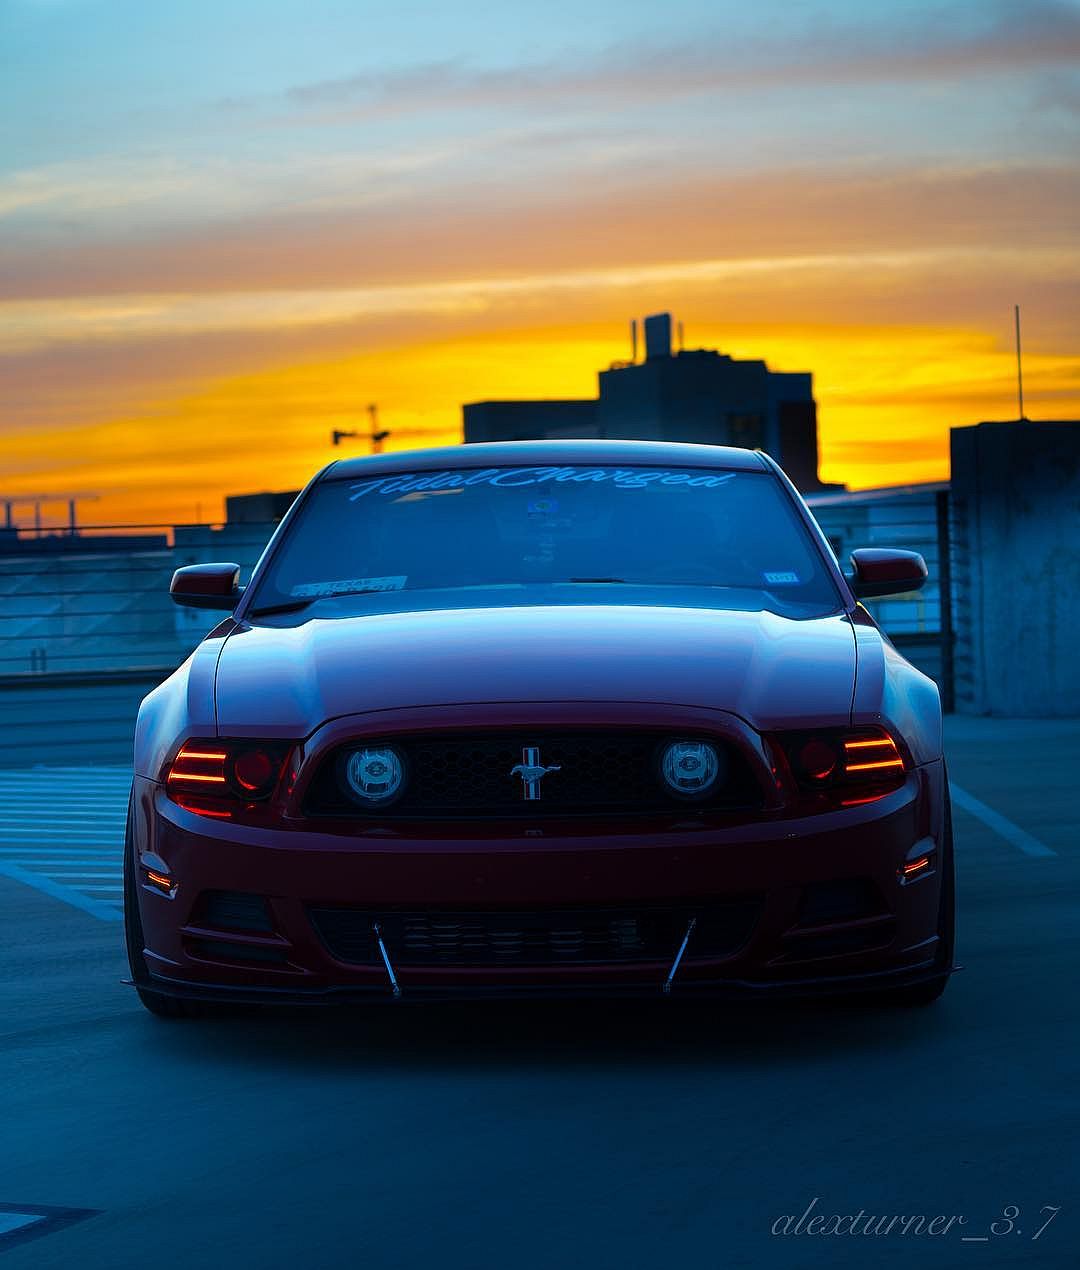 0mustang%20front%20led%20sidemarkers%20smoked%20drl%20boards%20red%20owner%20ig%20alexturner_3.7.jpg